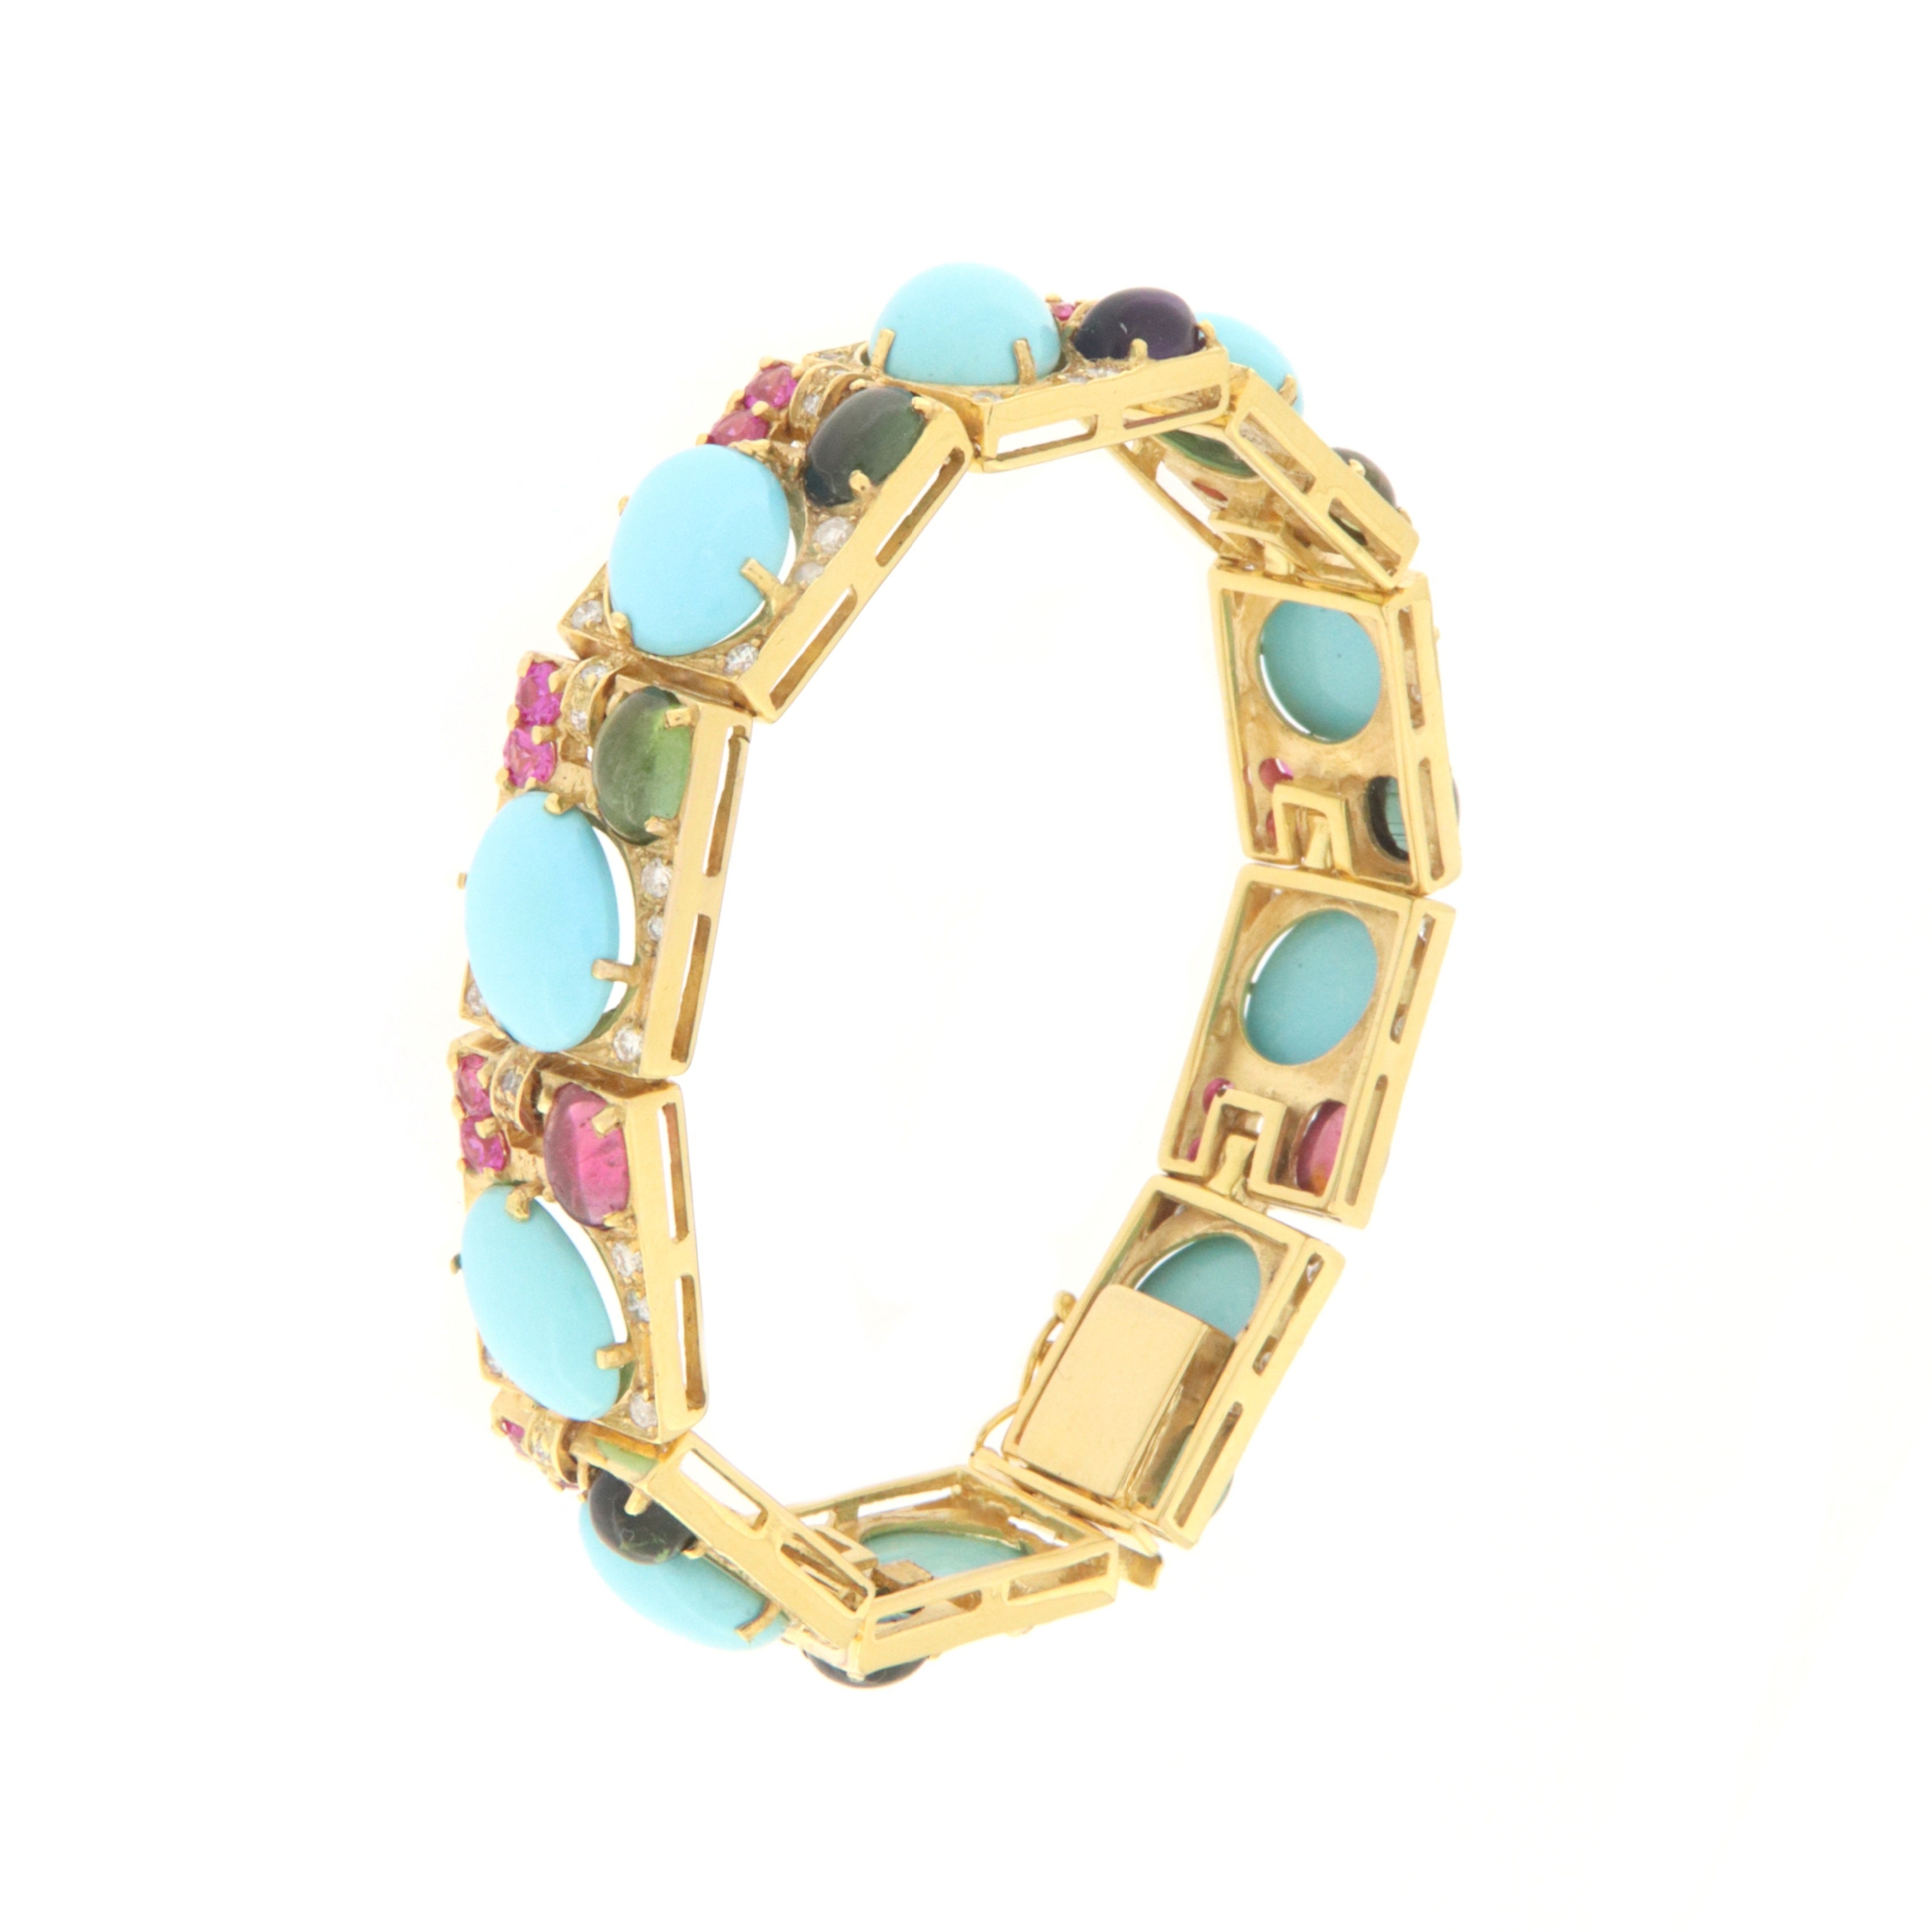 Beautiful bracelet in 14 karat yellow gold mounted with natural turquoise,diamonds,rubies and tourmaline
This bracelet was designed and created by Neapolitan goldsmiths. The bracelet is soft on the wrist, it is flashy and adaptable to any type of